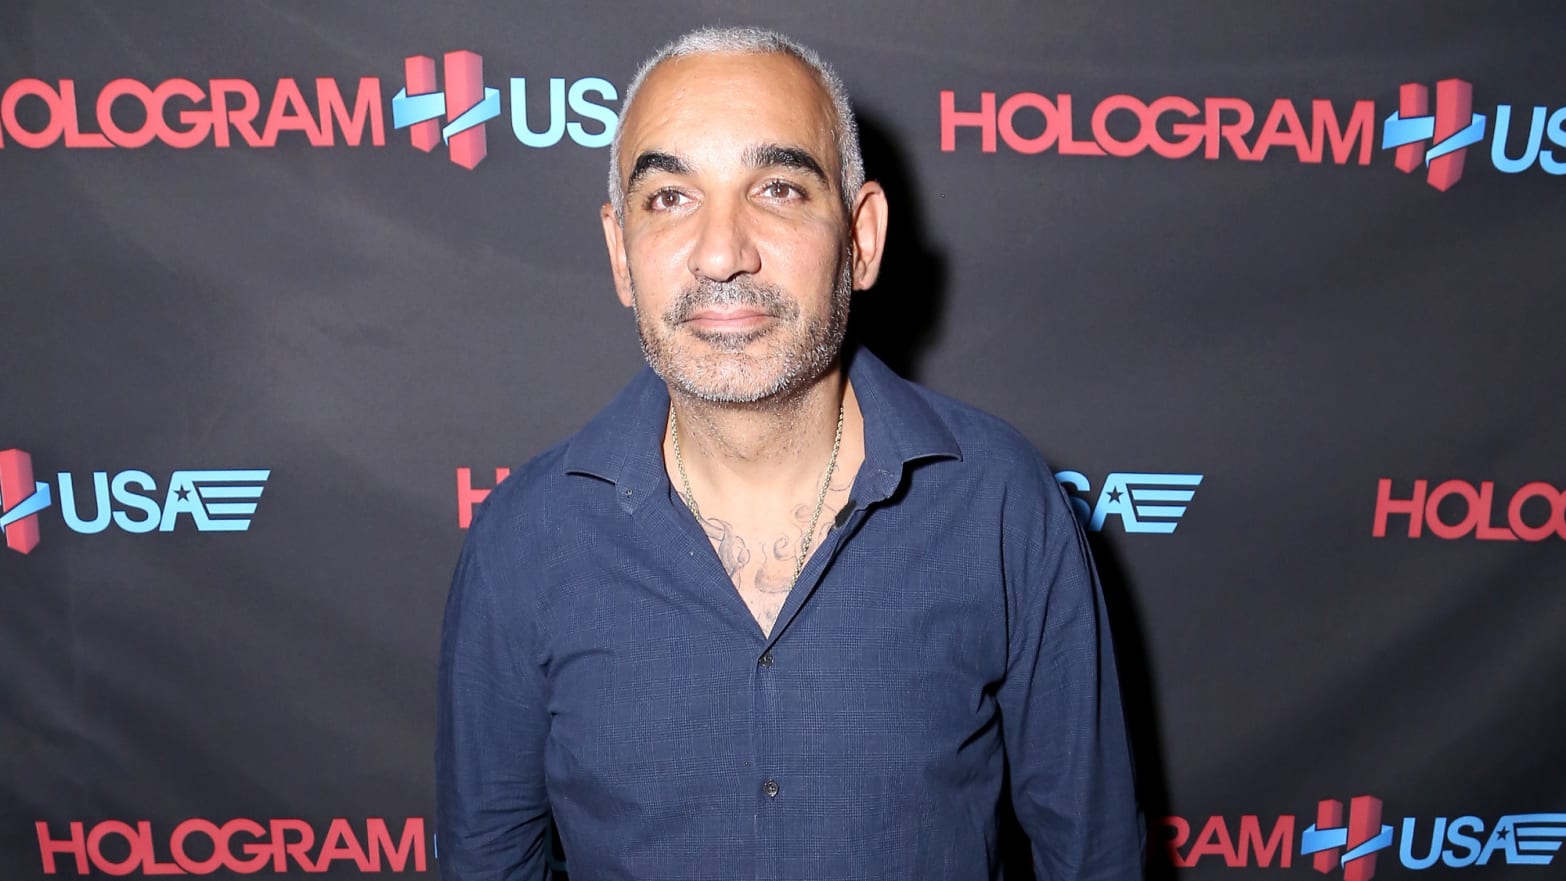 Alki David attends Hologram USA's Gala Preview at Hologram USA Theater on September 28, 2017 in Los Angeles, California.